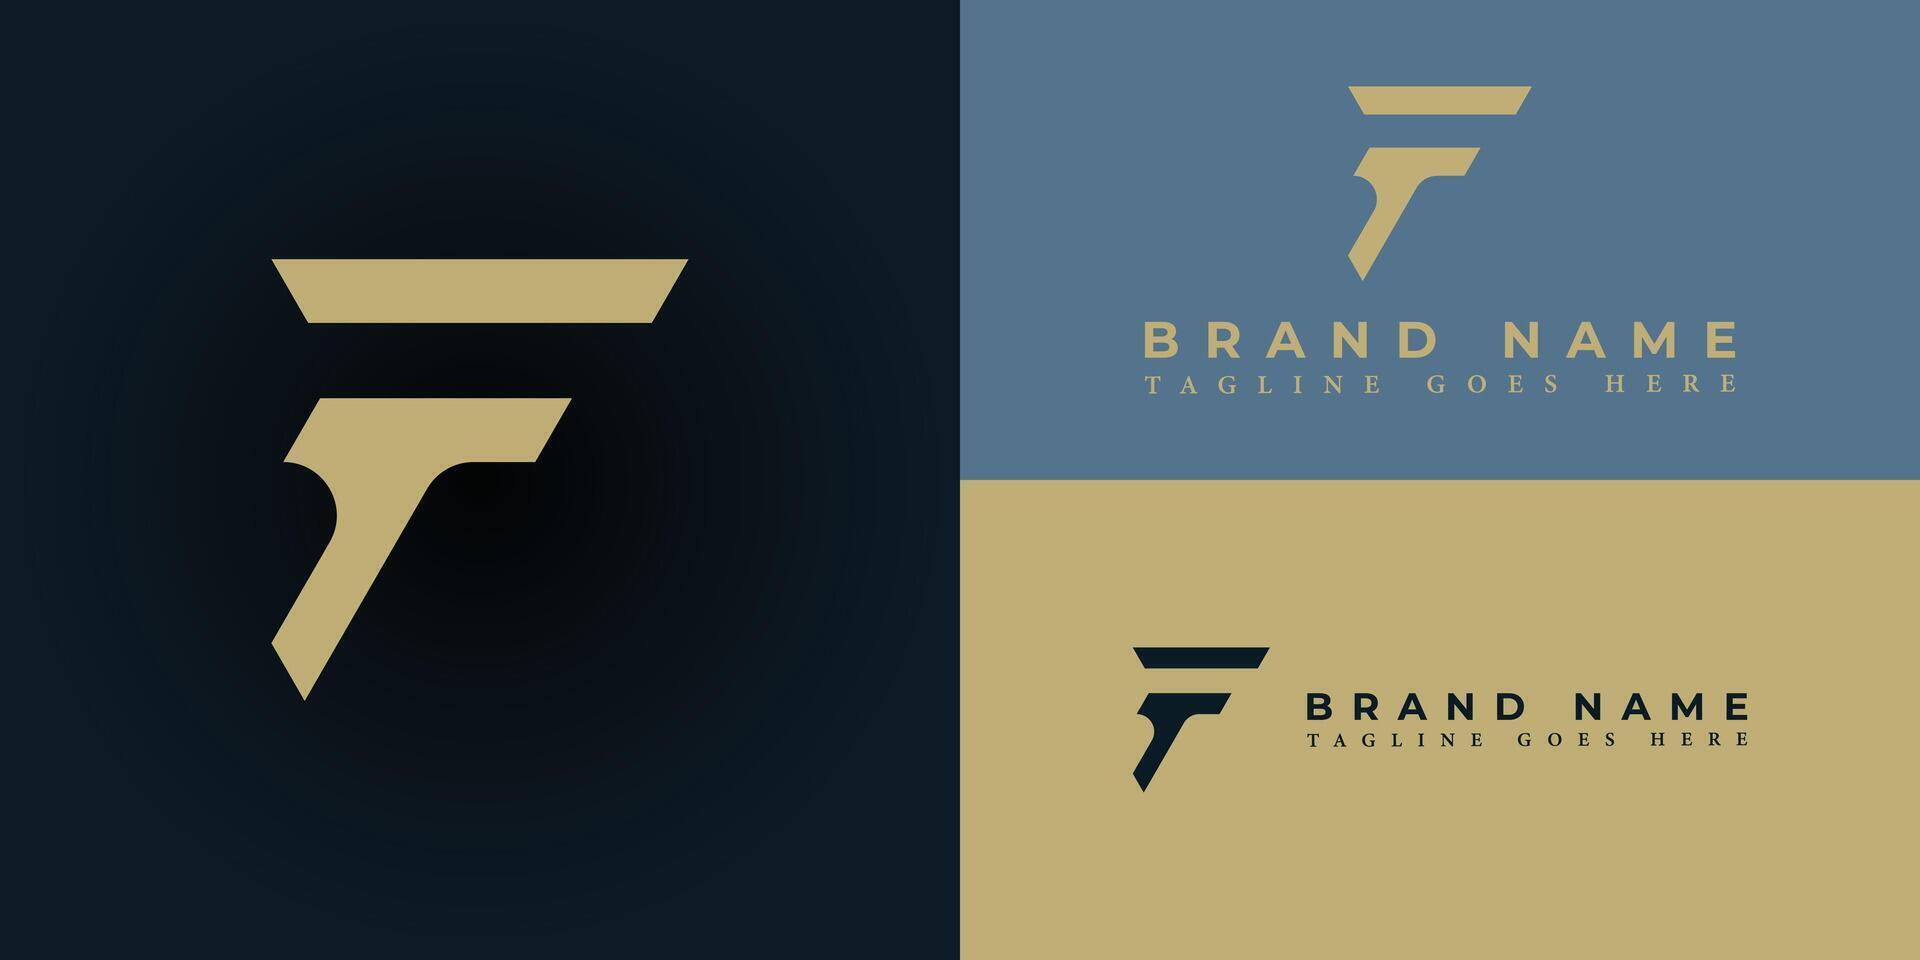 Abstract initial letter FT or TF logo design vector graphic idea creative in gold color isolated on multiple background colors. The logo is applied for gym sports business logo icon design inspiration